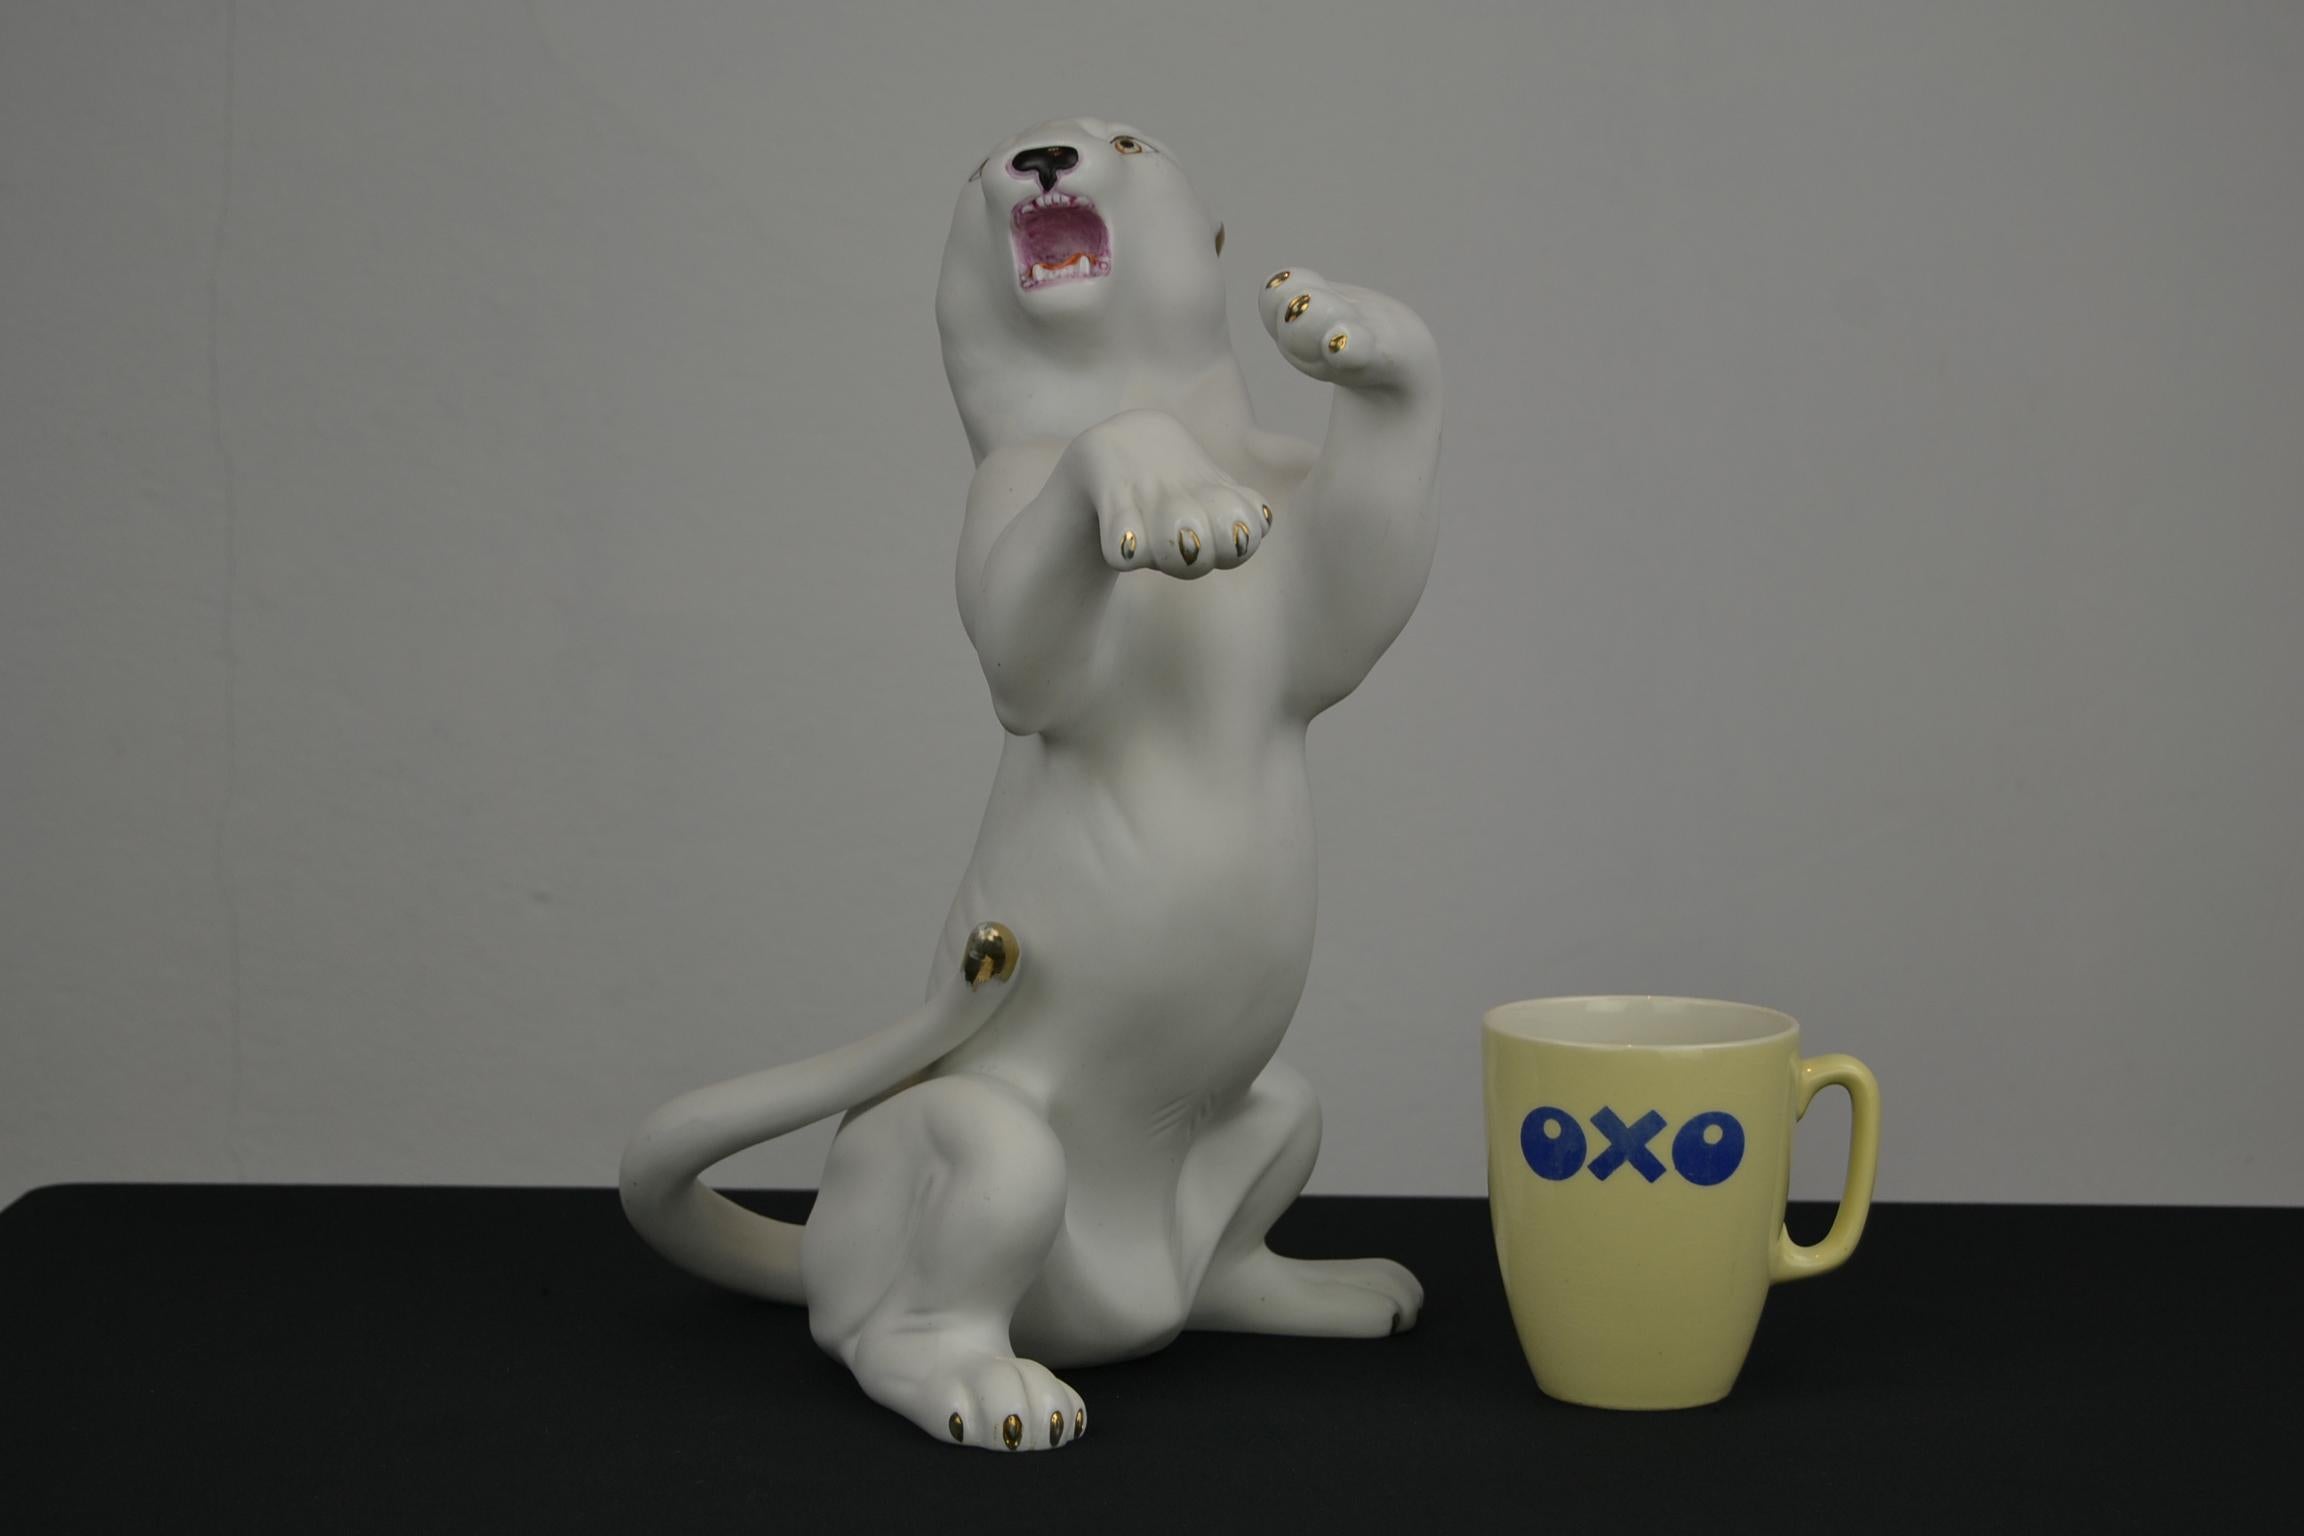 Biscuit Porcelain White Puma Sculpture. 
This White Puma Sculpture is very expressive and has hand-painted golden accents on the claws, ears and tale. It's a stylish detailed animal sculpture; look at the mouth, tongue and teeth. In good condition